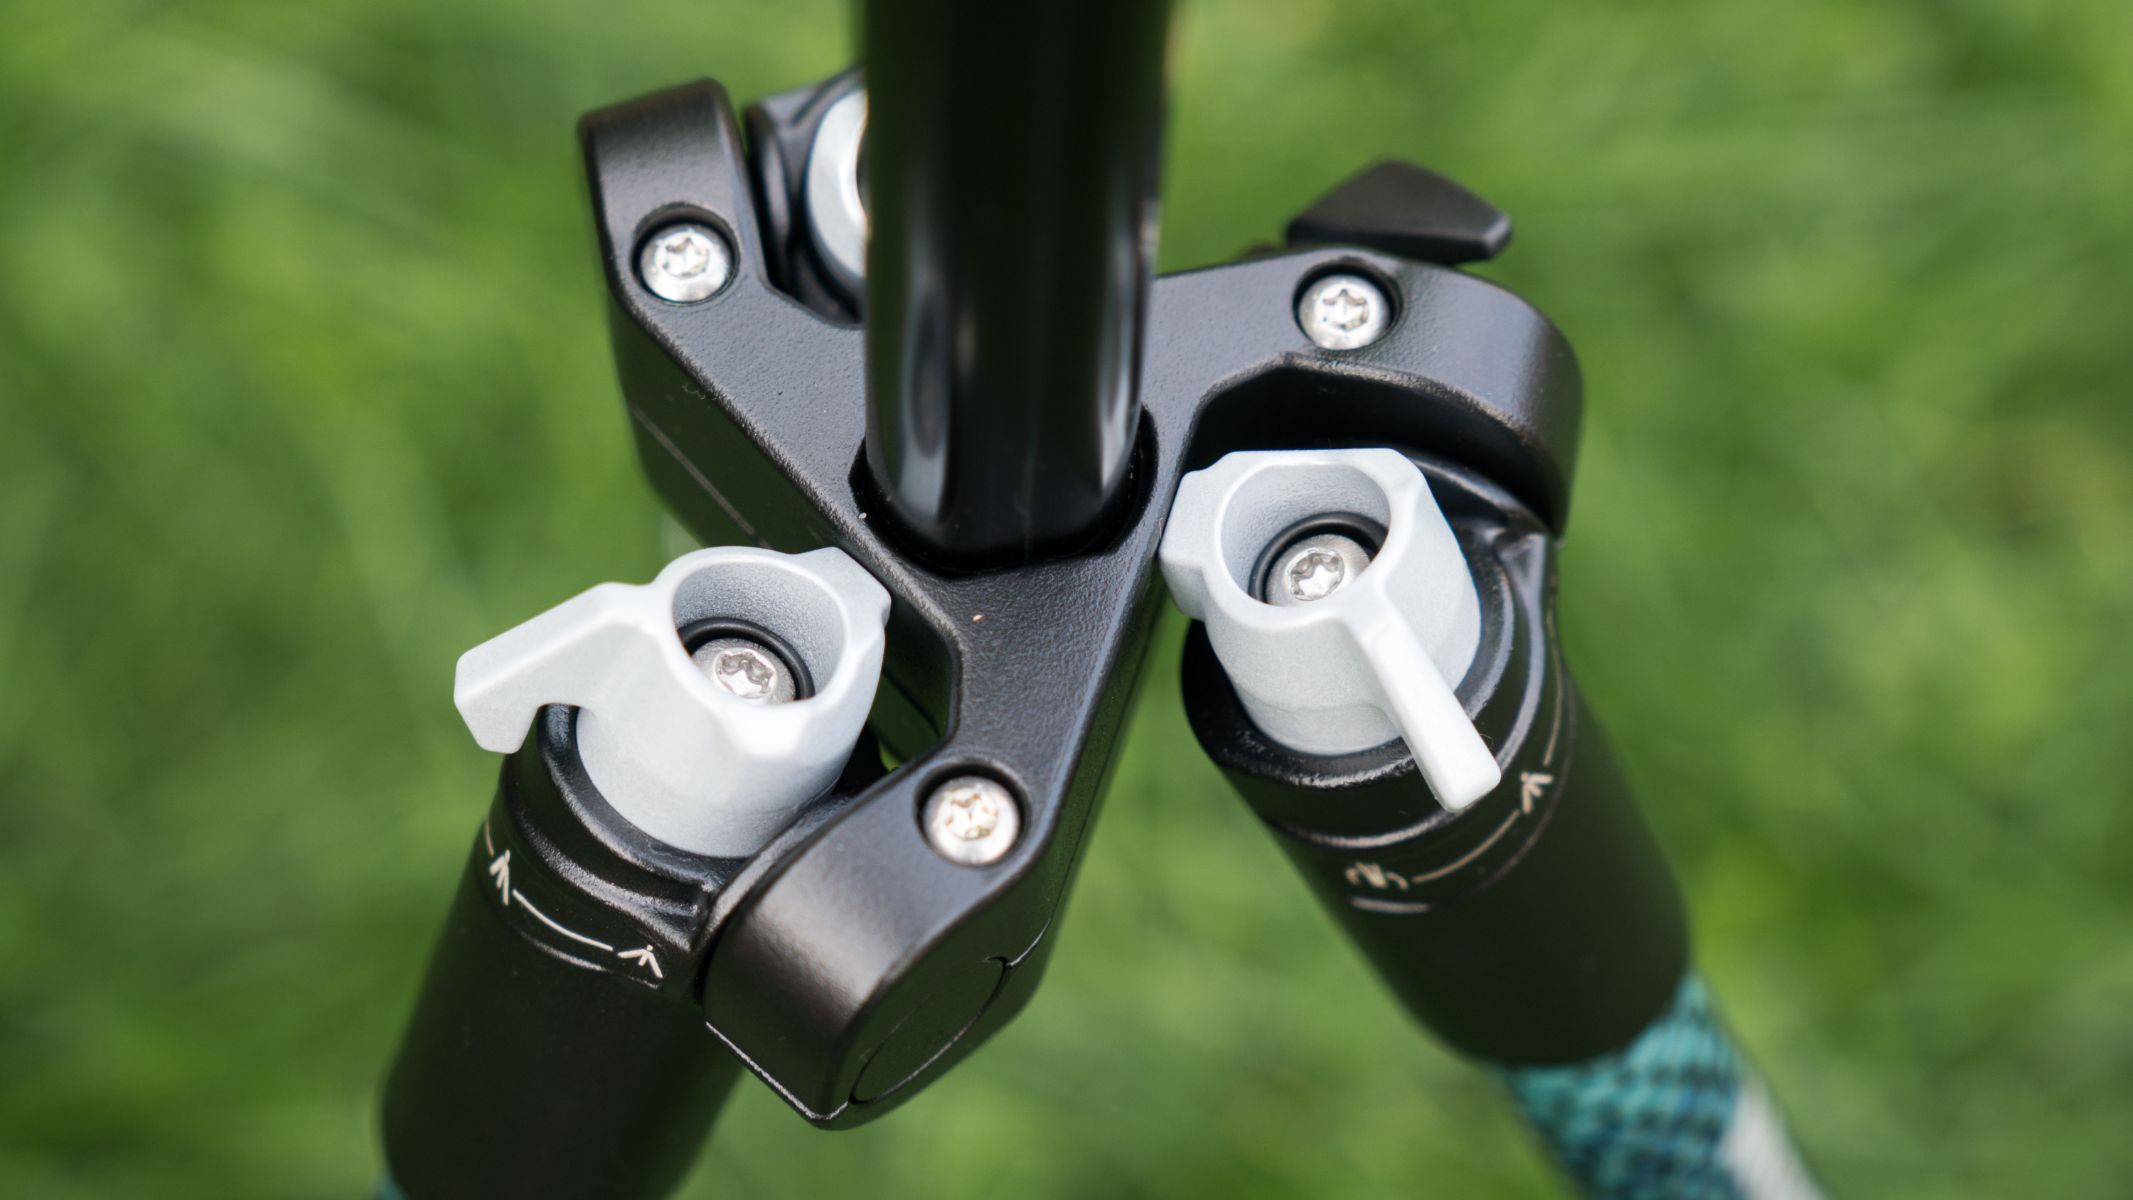 A close up view of the locking levers on the tripod legs